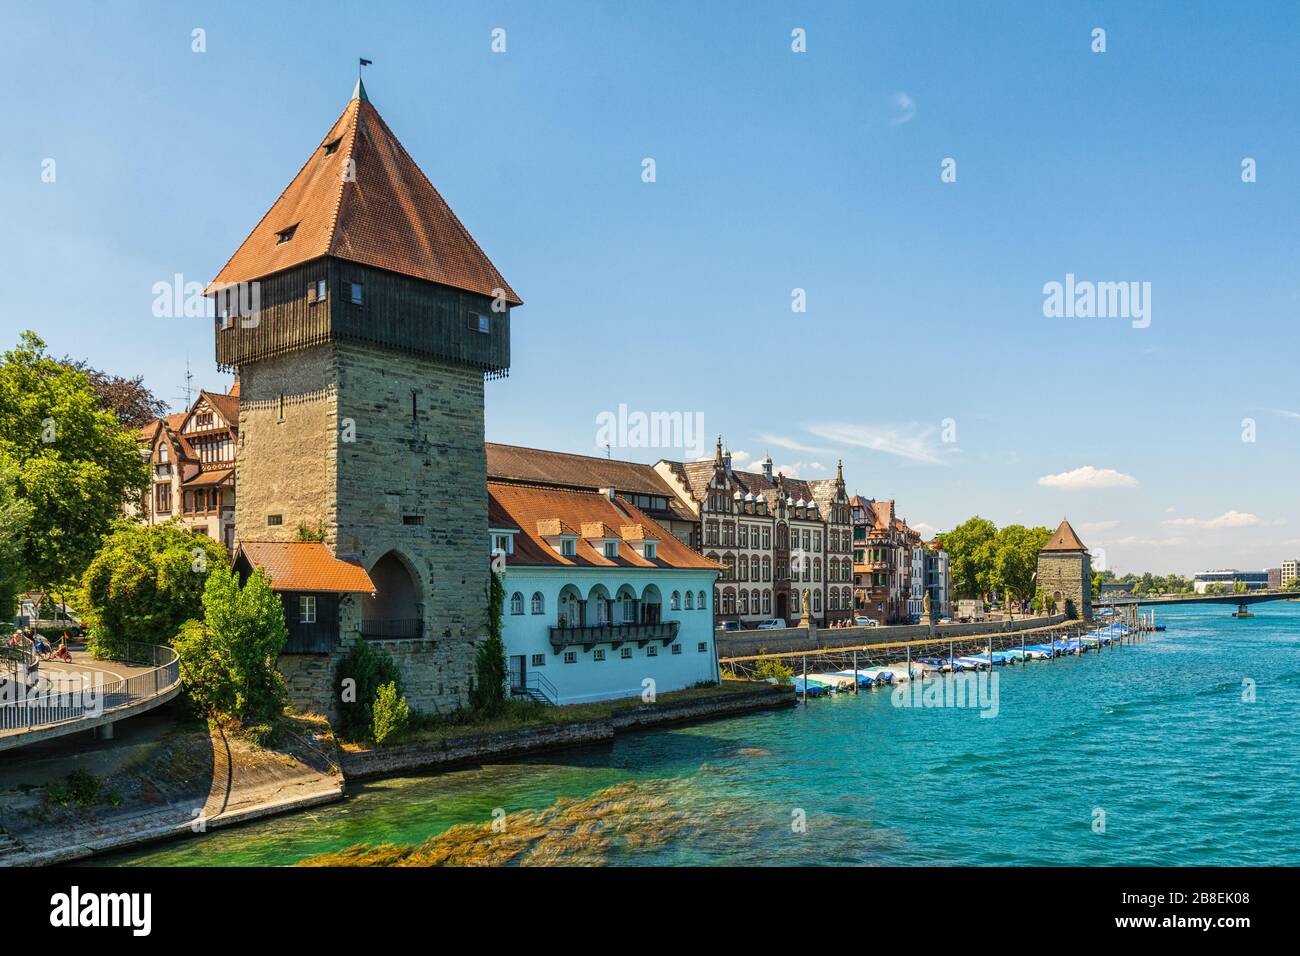 The Rhine Gate Tower in Constance on Lake Constance Stock Photo